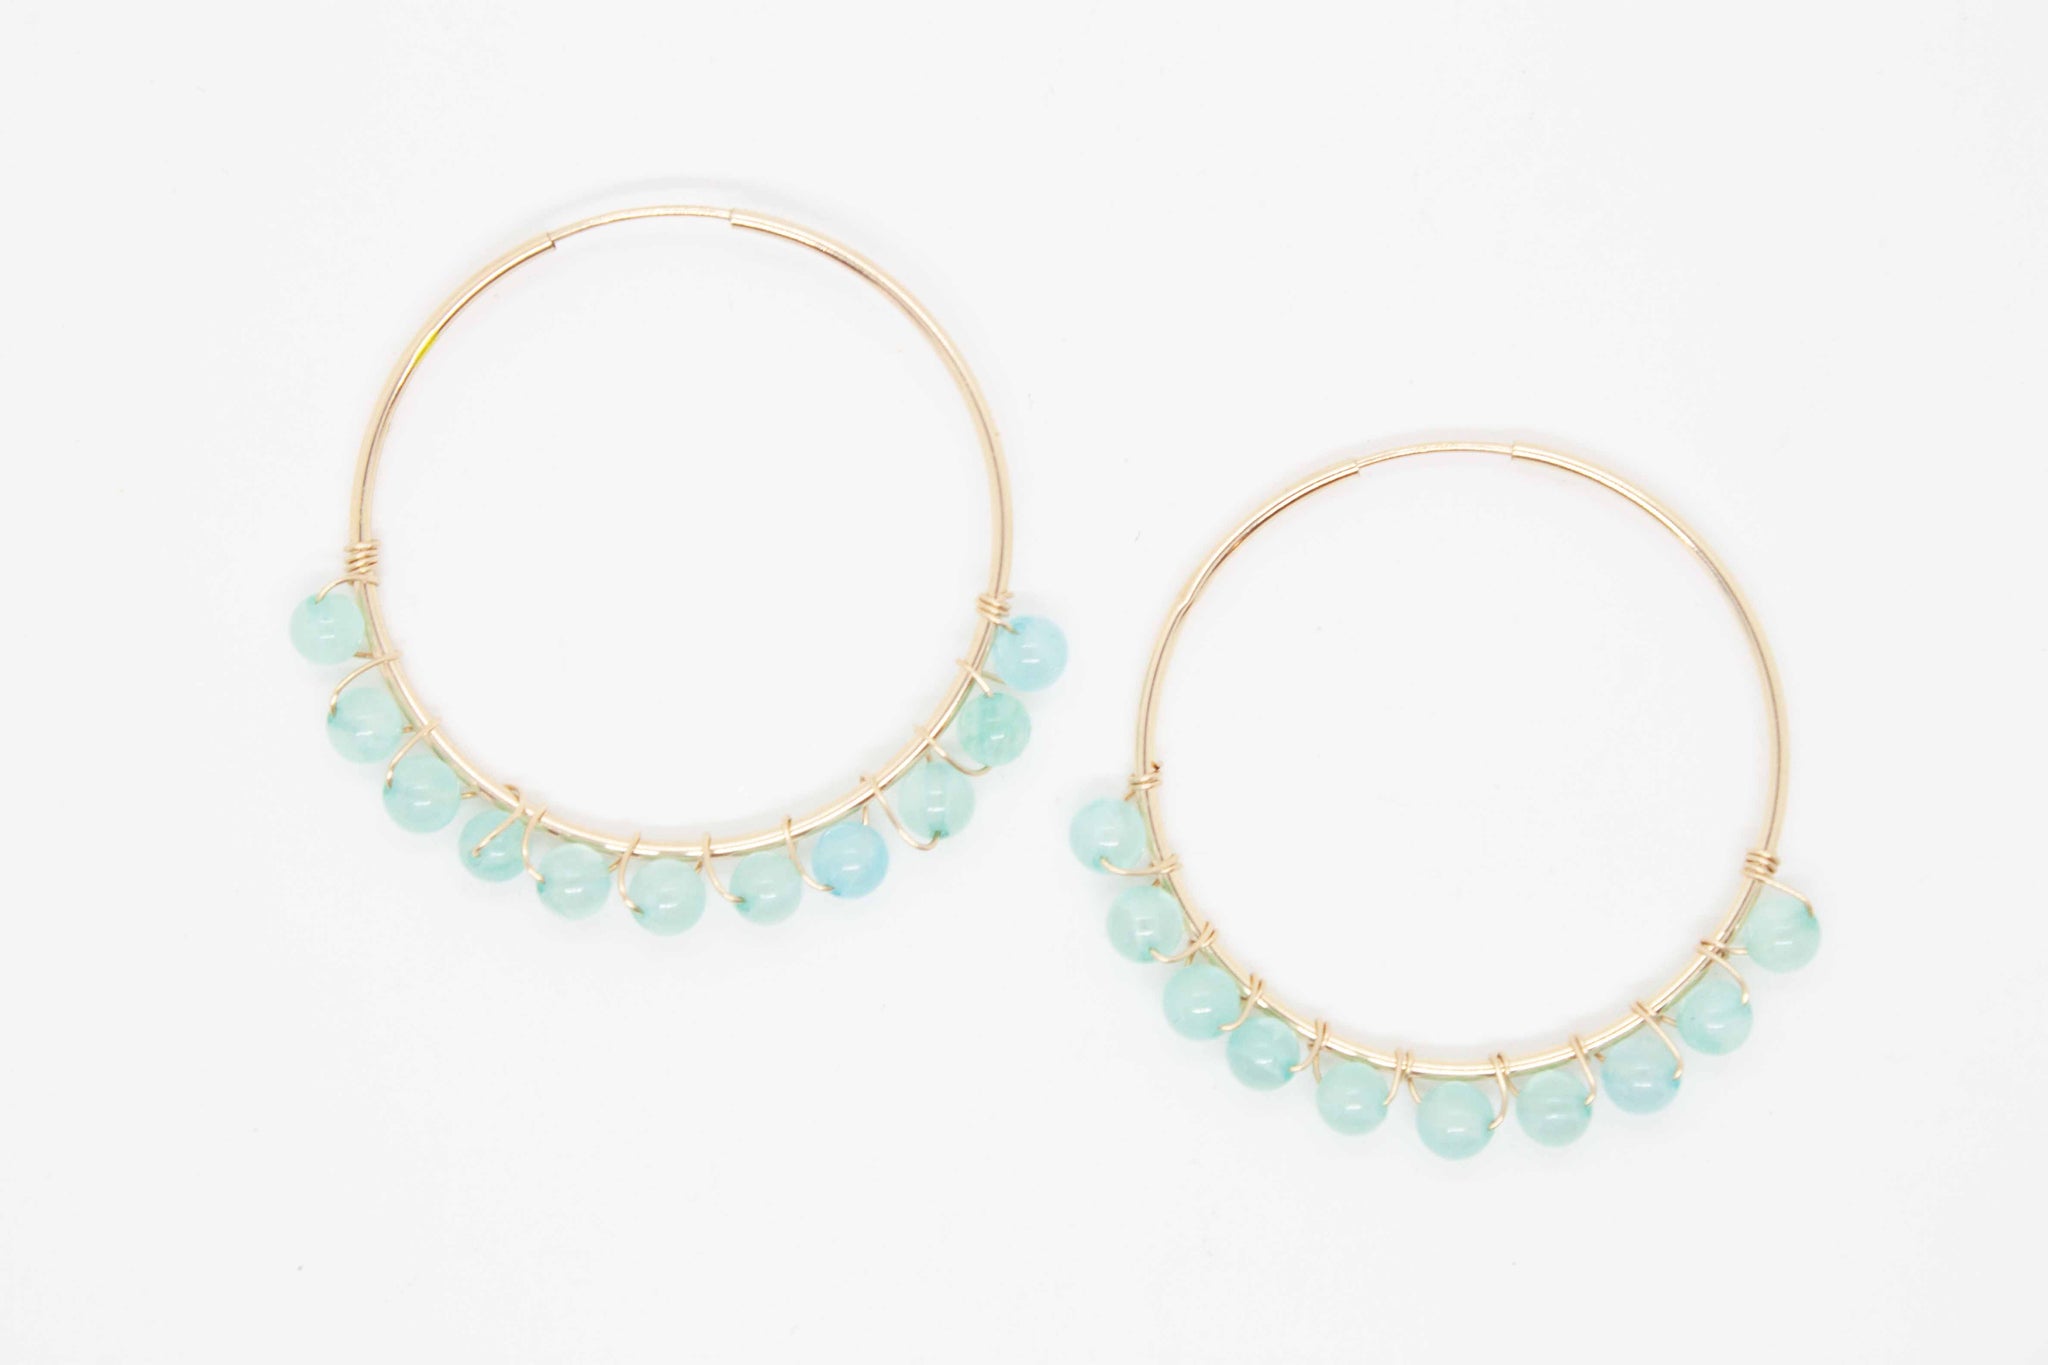 Bodacious ear candy to crank up your Zoom calls this summer!  40mm gold filled hoop earrings and aqua beads wrapped with gold wire. Handmade in Toronto.